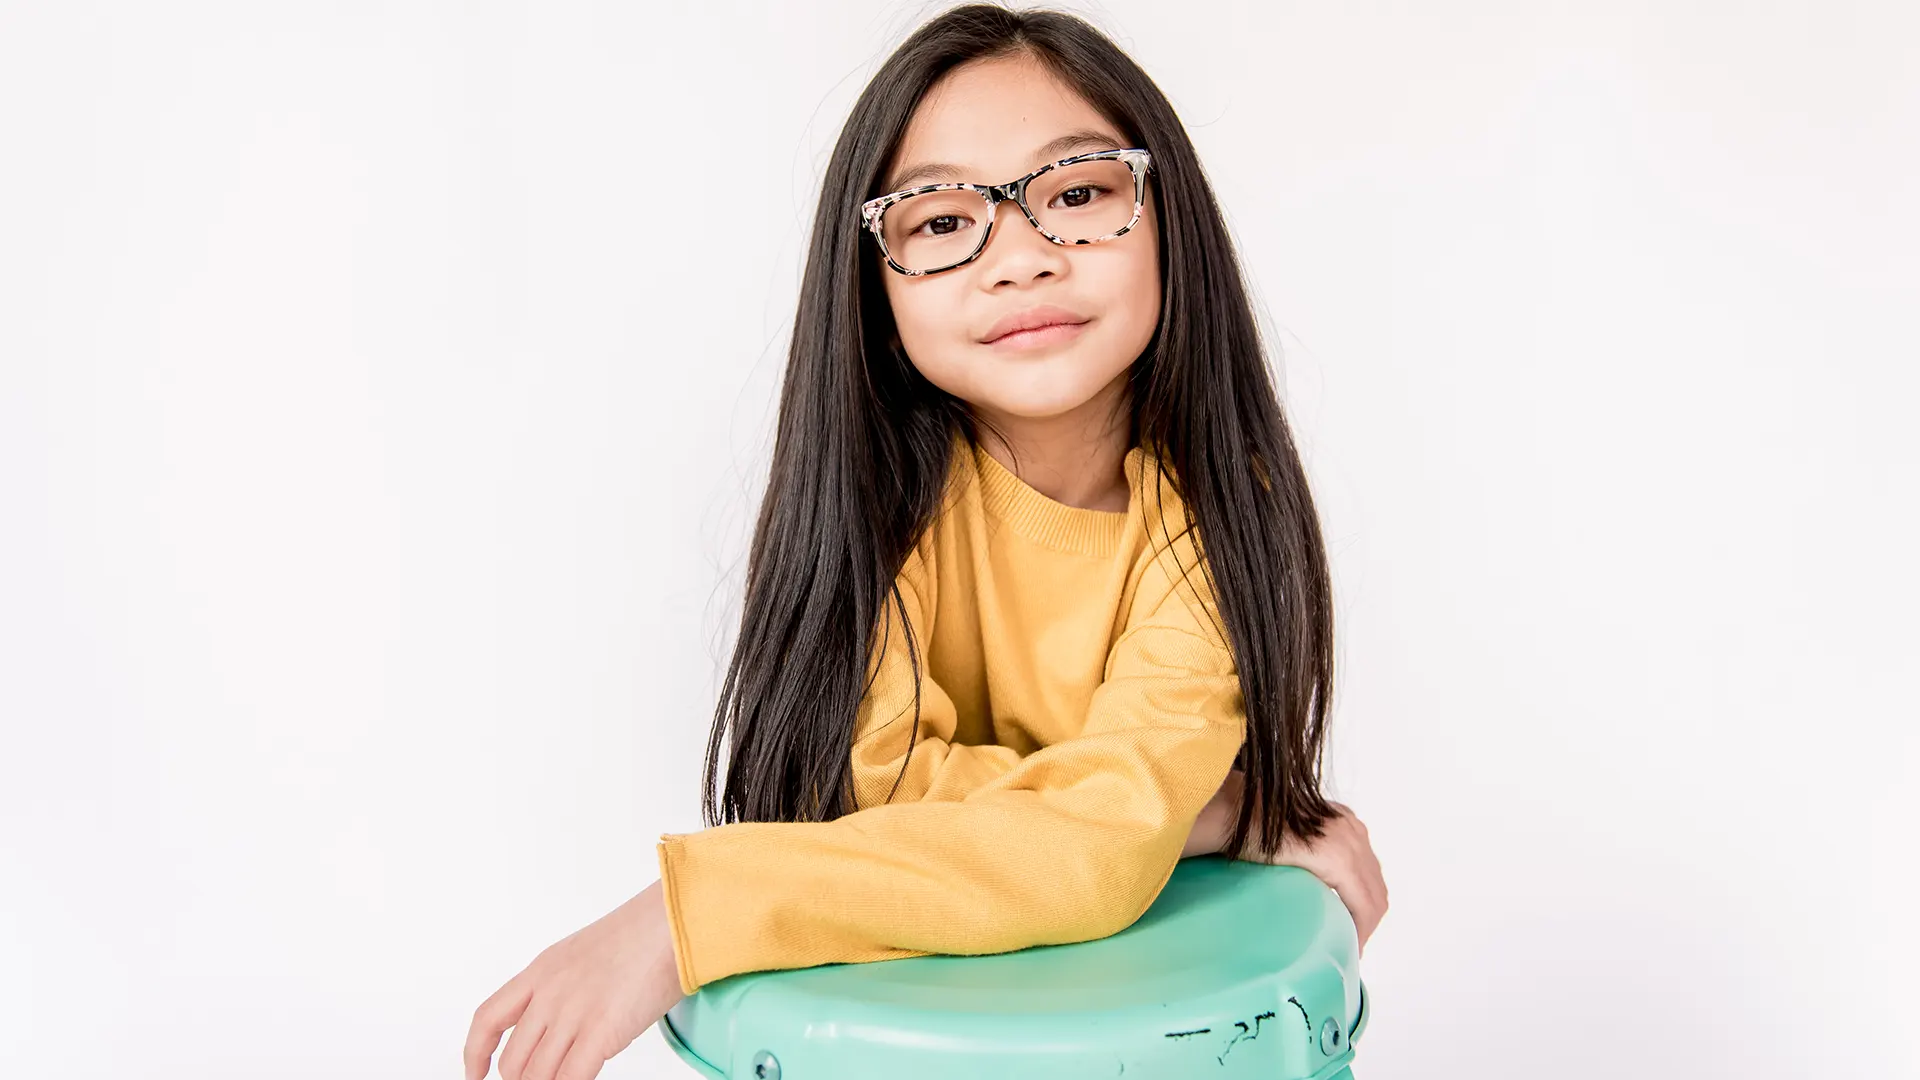 10 Things To Do If Your Child Hates Wearing Glasses